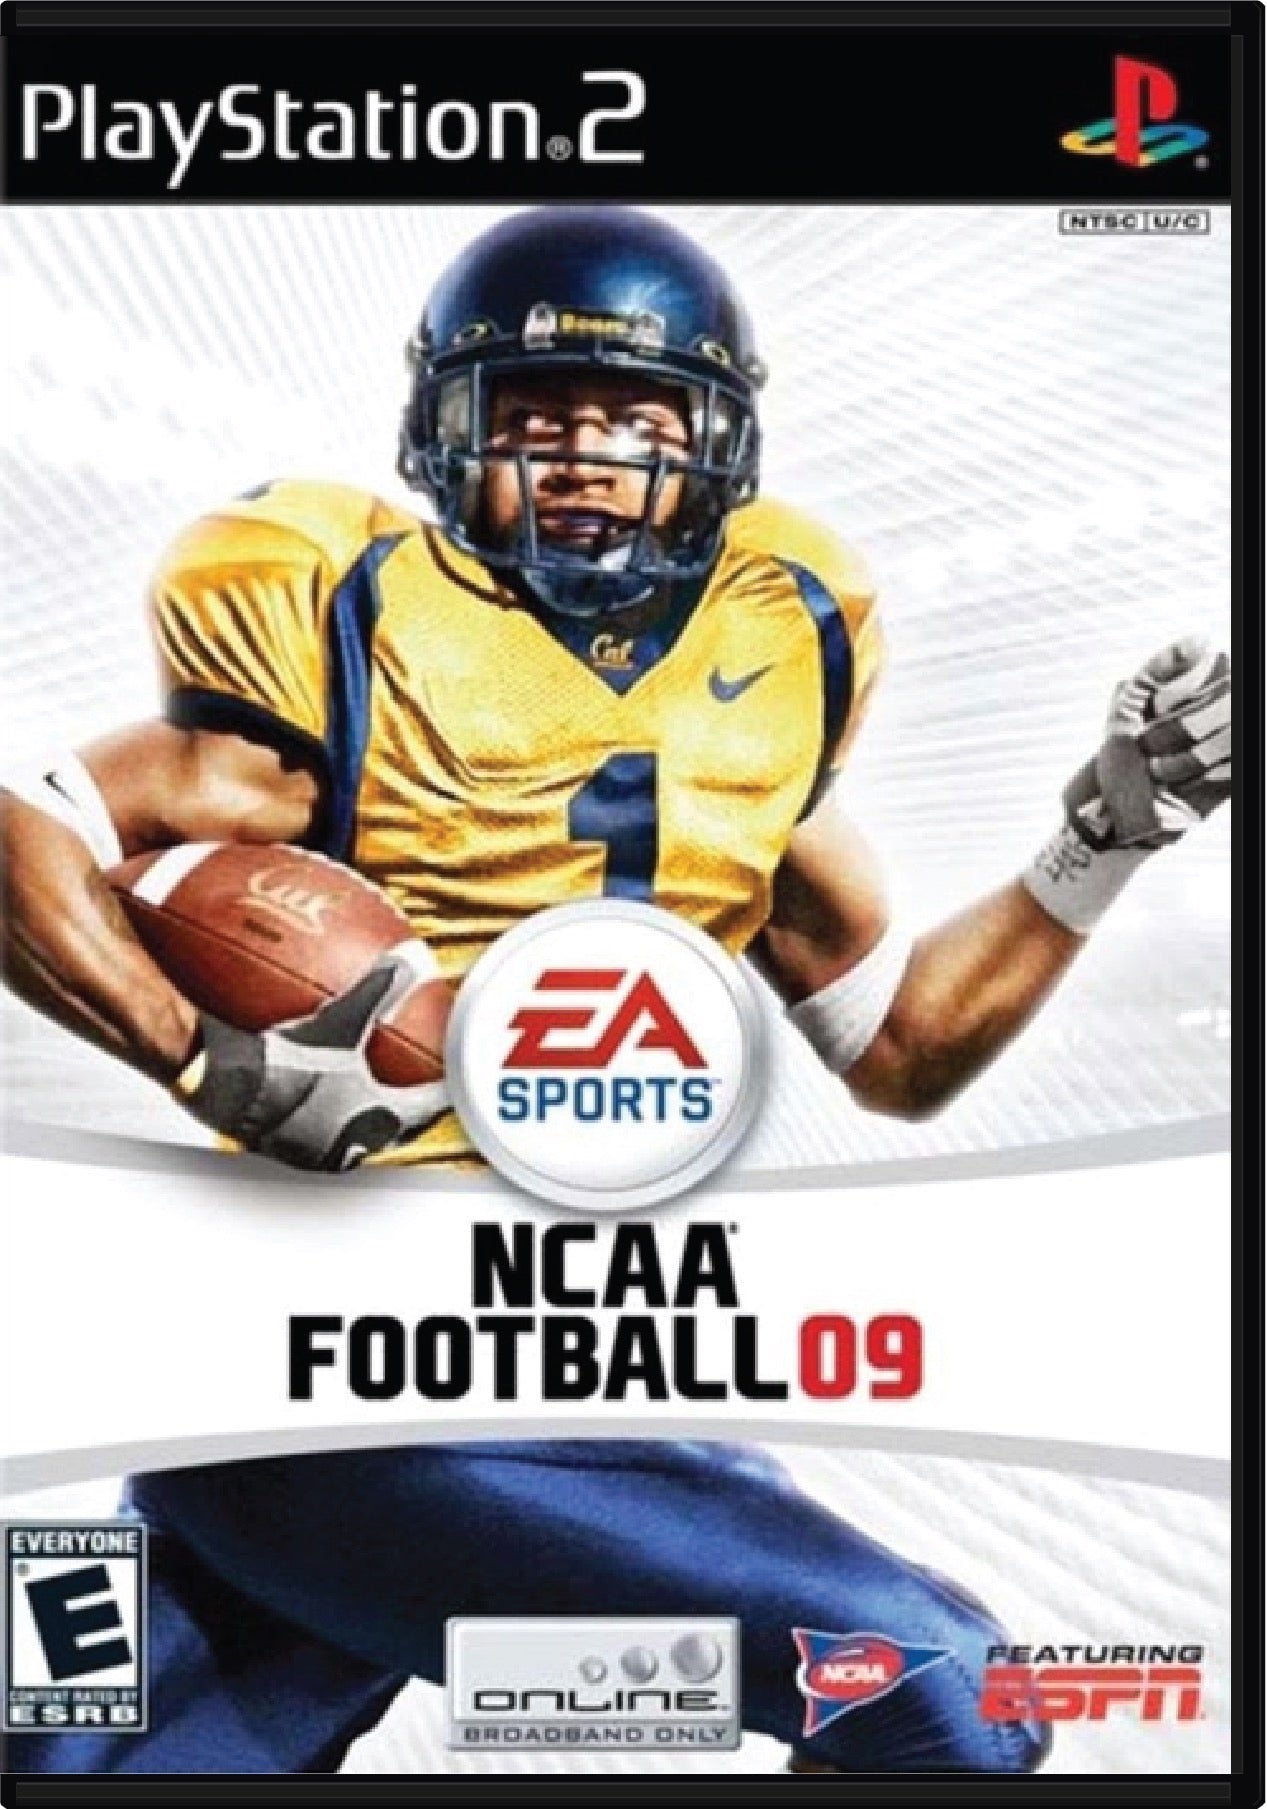 NCAA Football 09 Cover Art and Product Photo